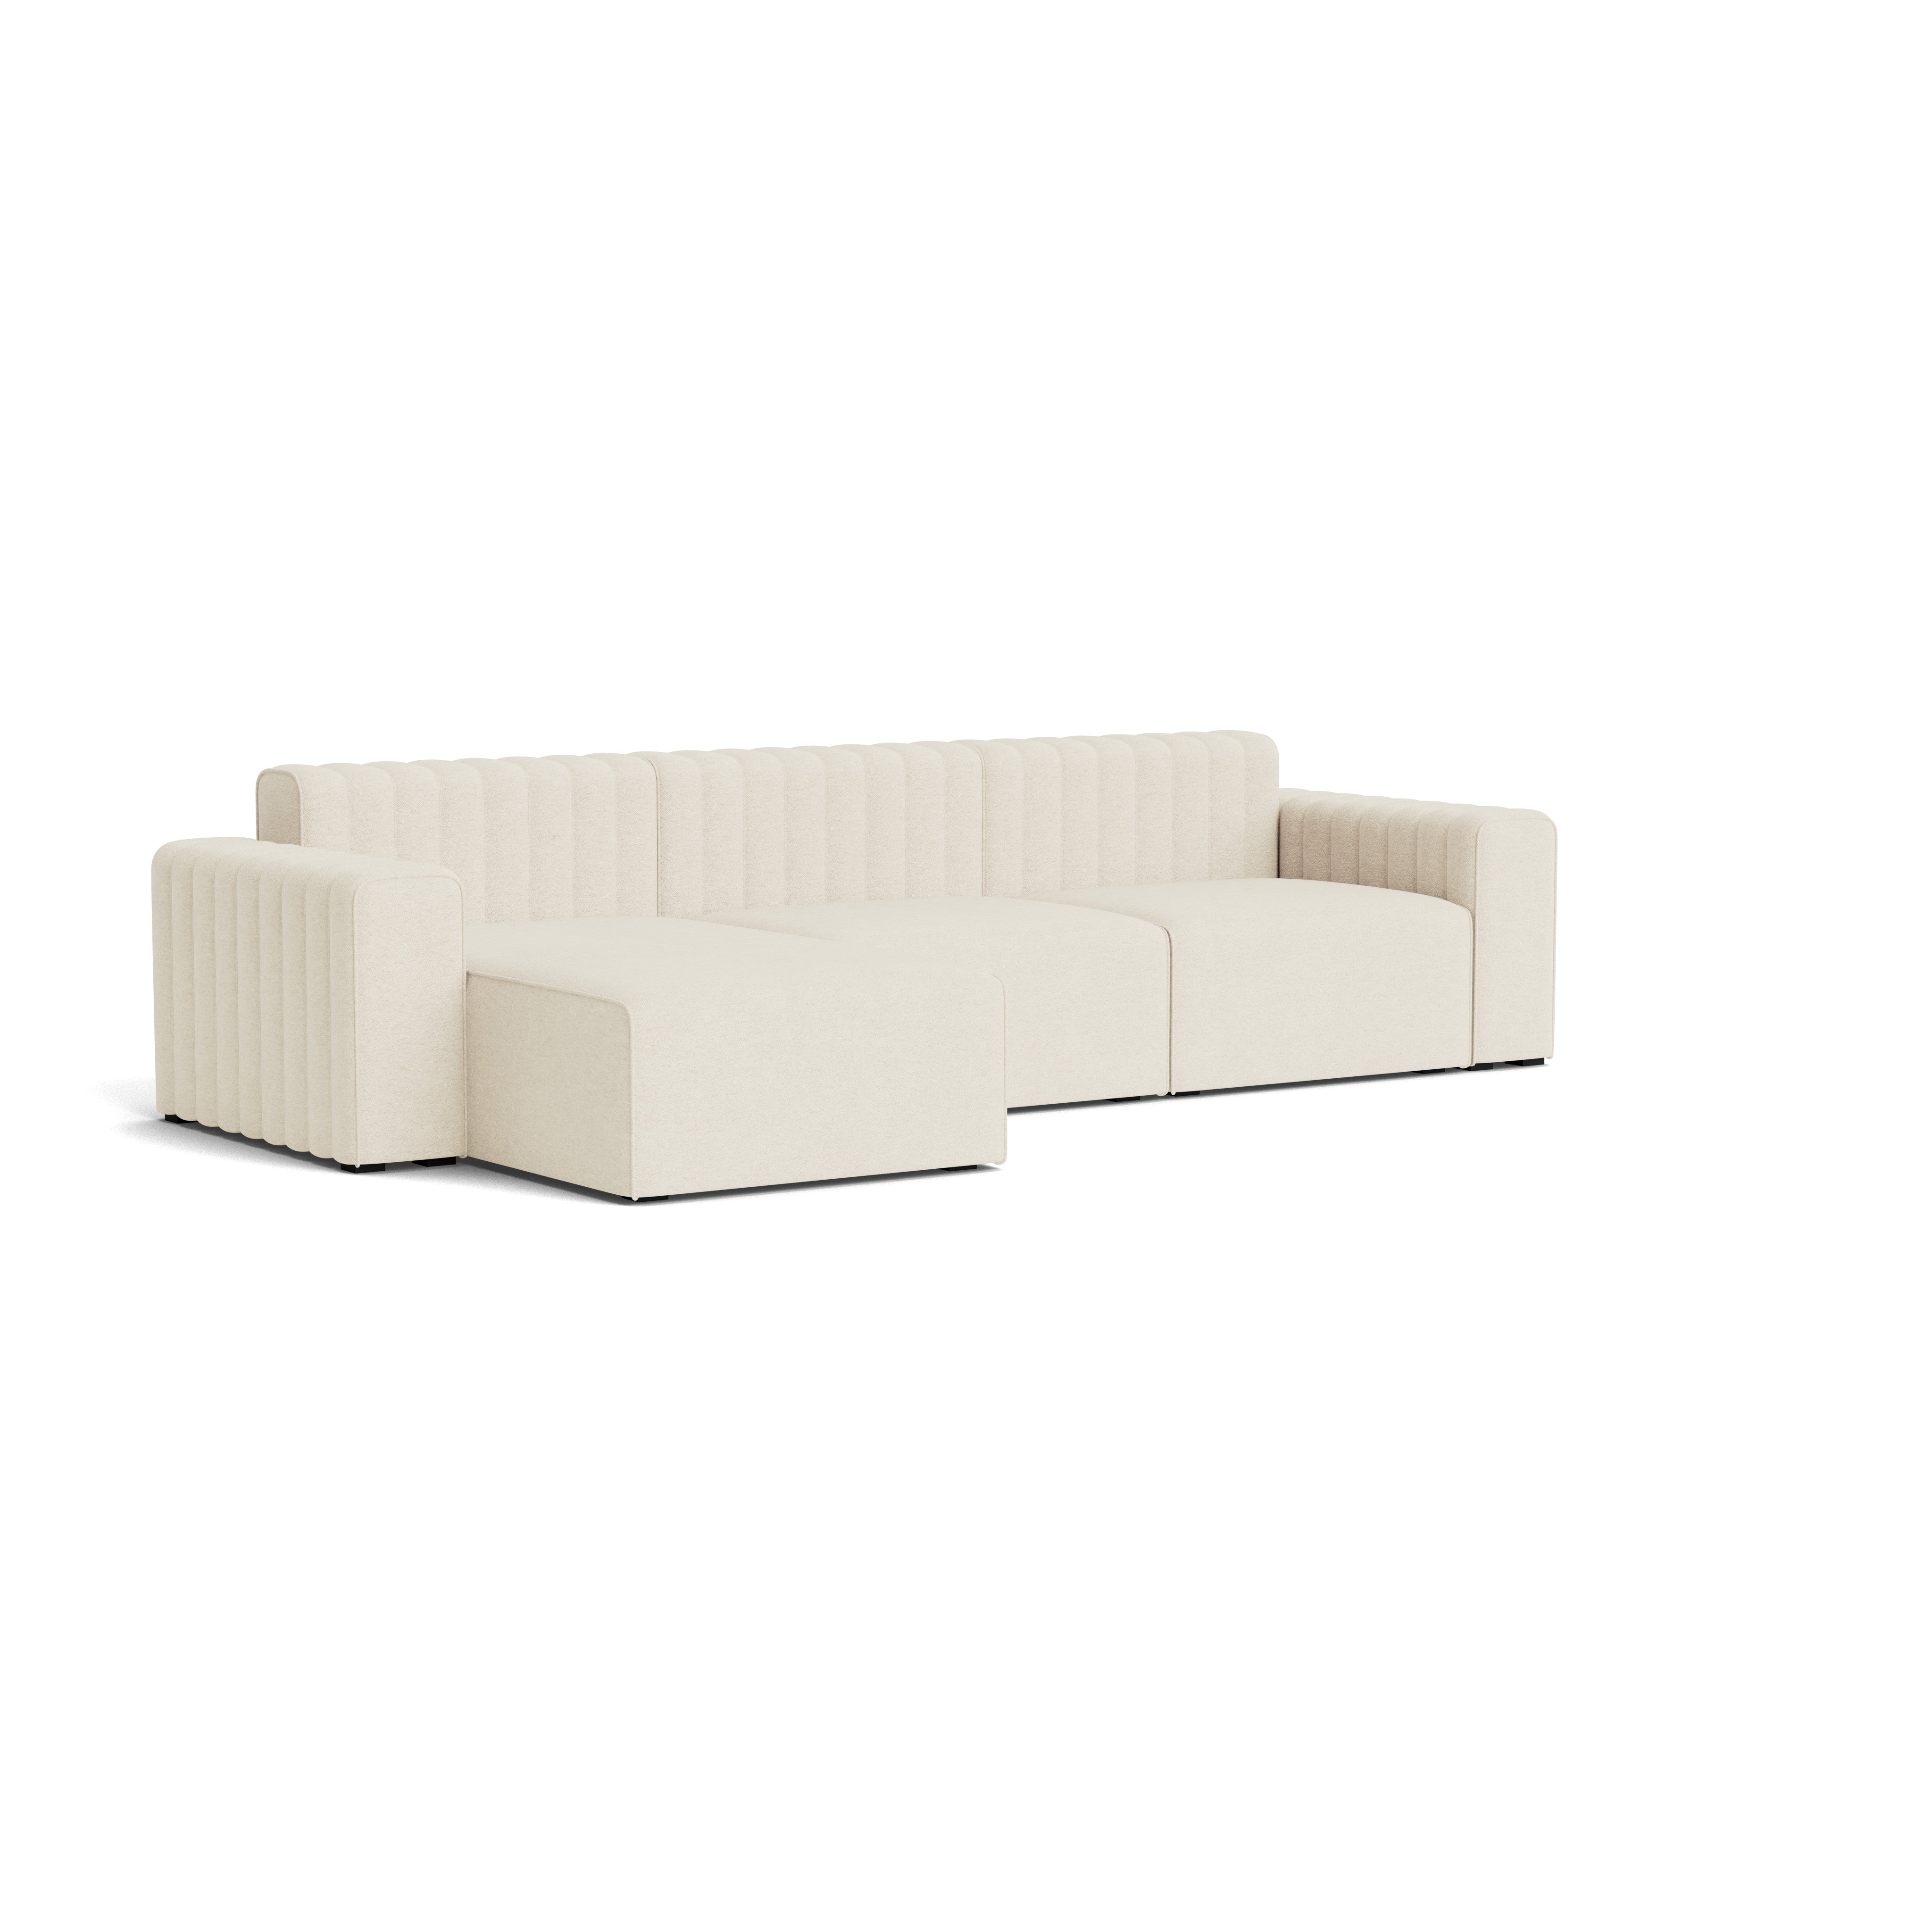 NORR11 RIFF Sofa - 3 Seater w/ Chaise Longue Right